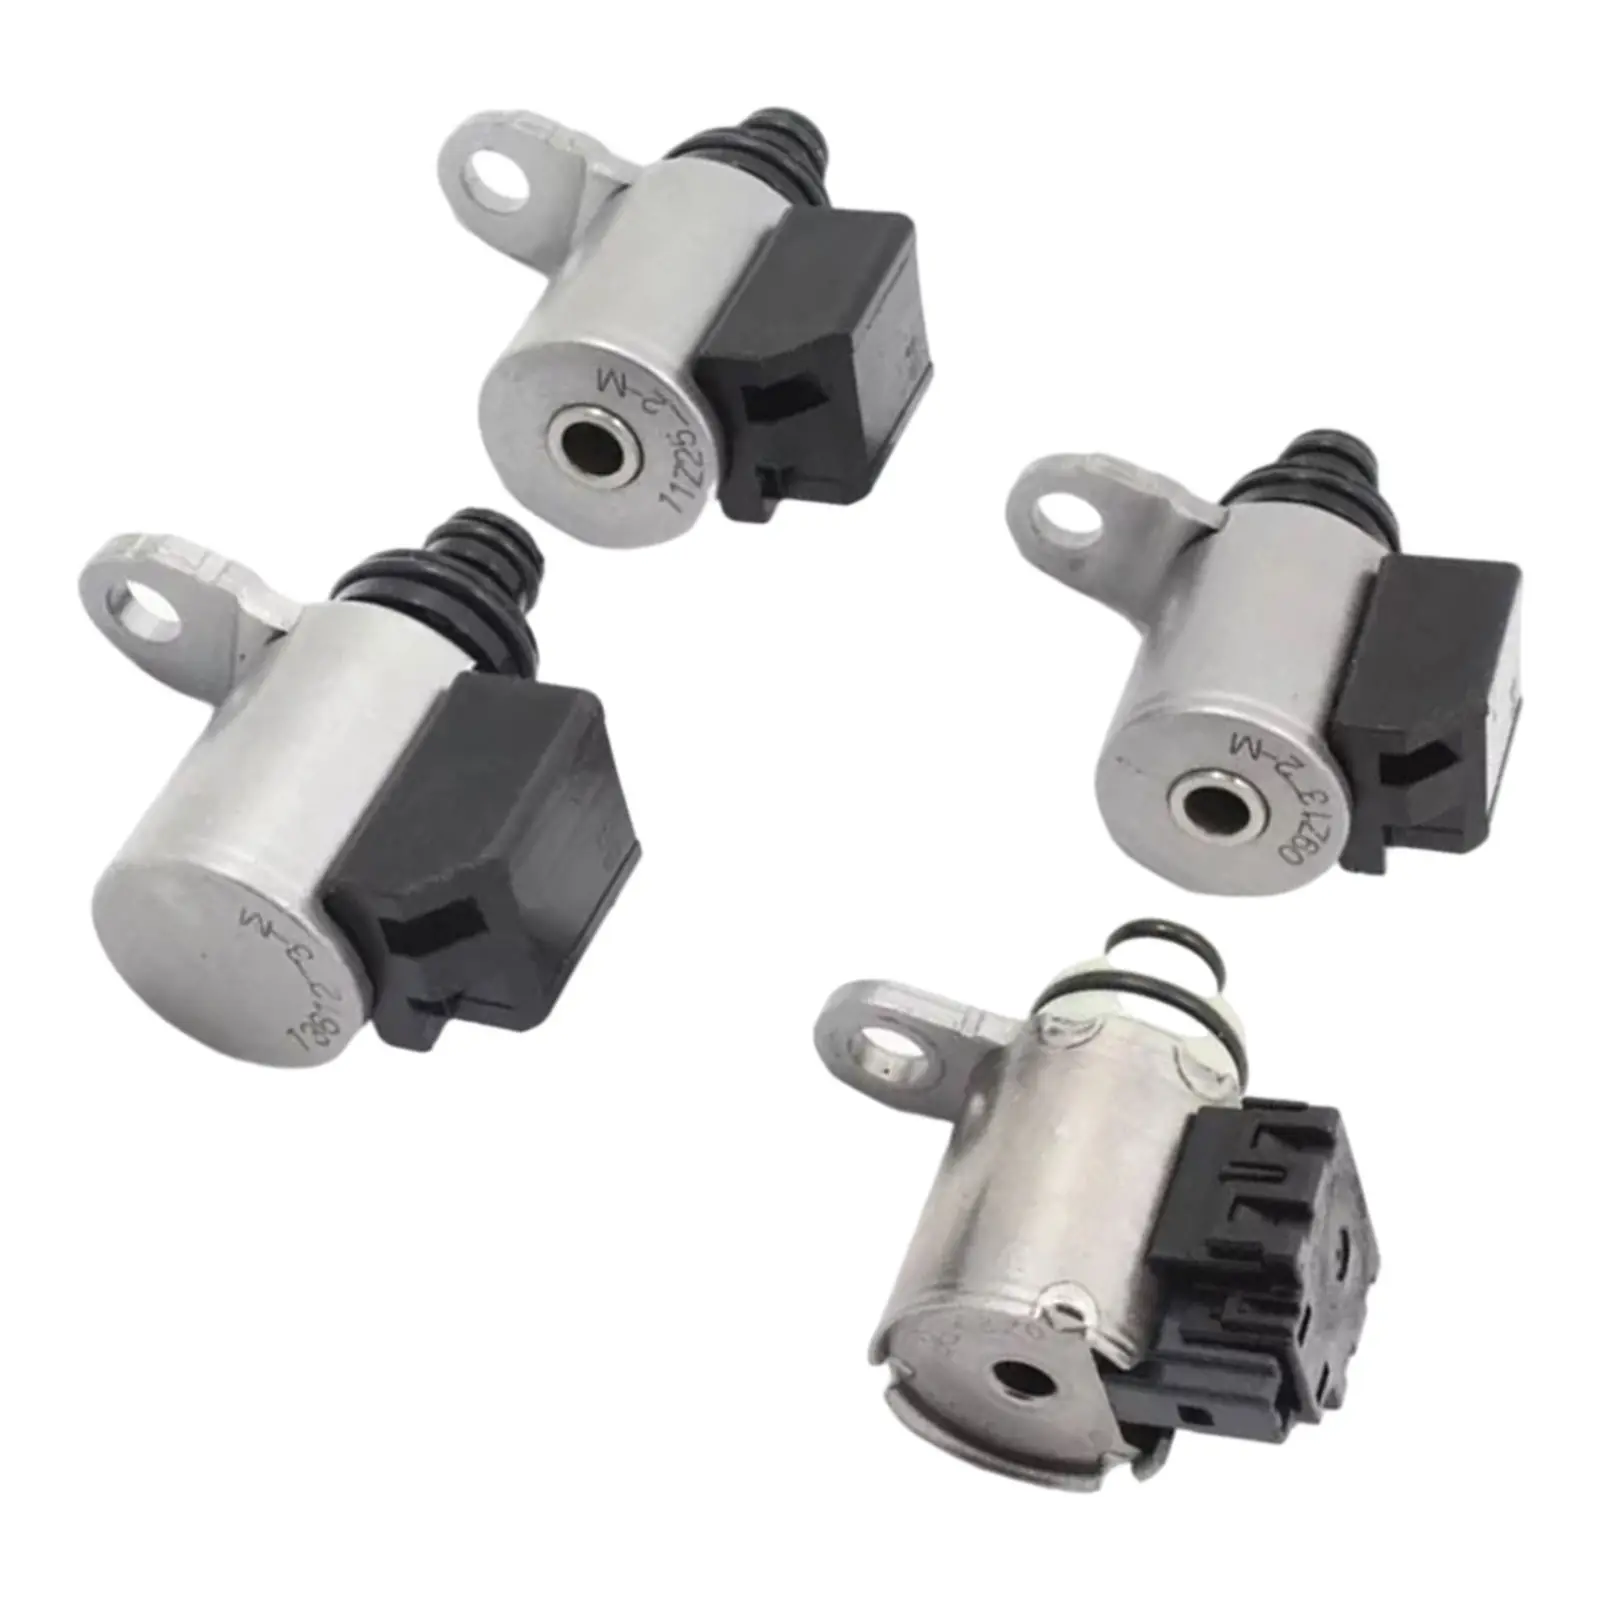 4Pcs Transmission Valve Solenoid Kit for   Rogue 09-12 RE0F10A JF011E Replacement Parts Accessories